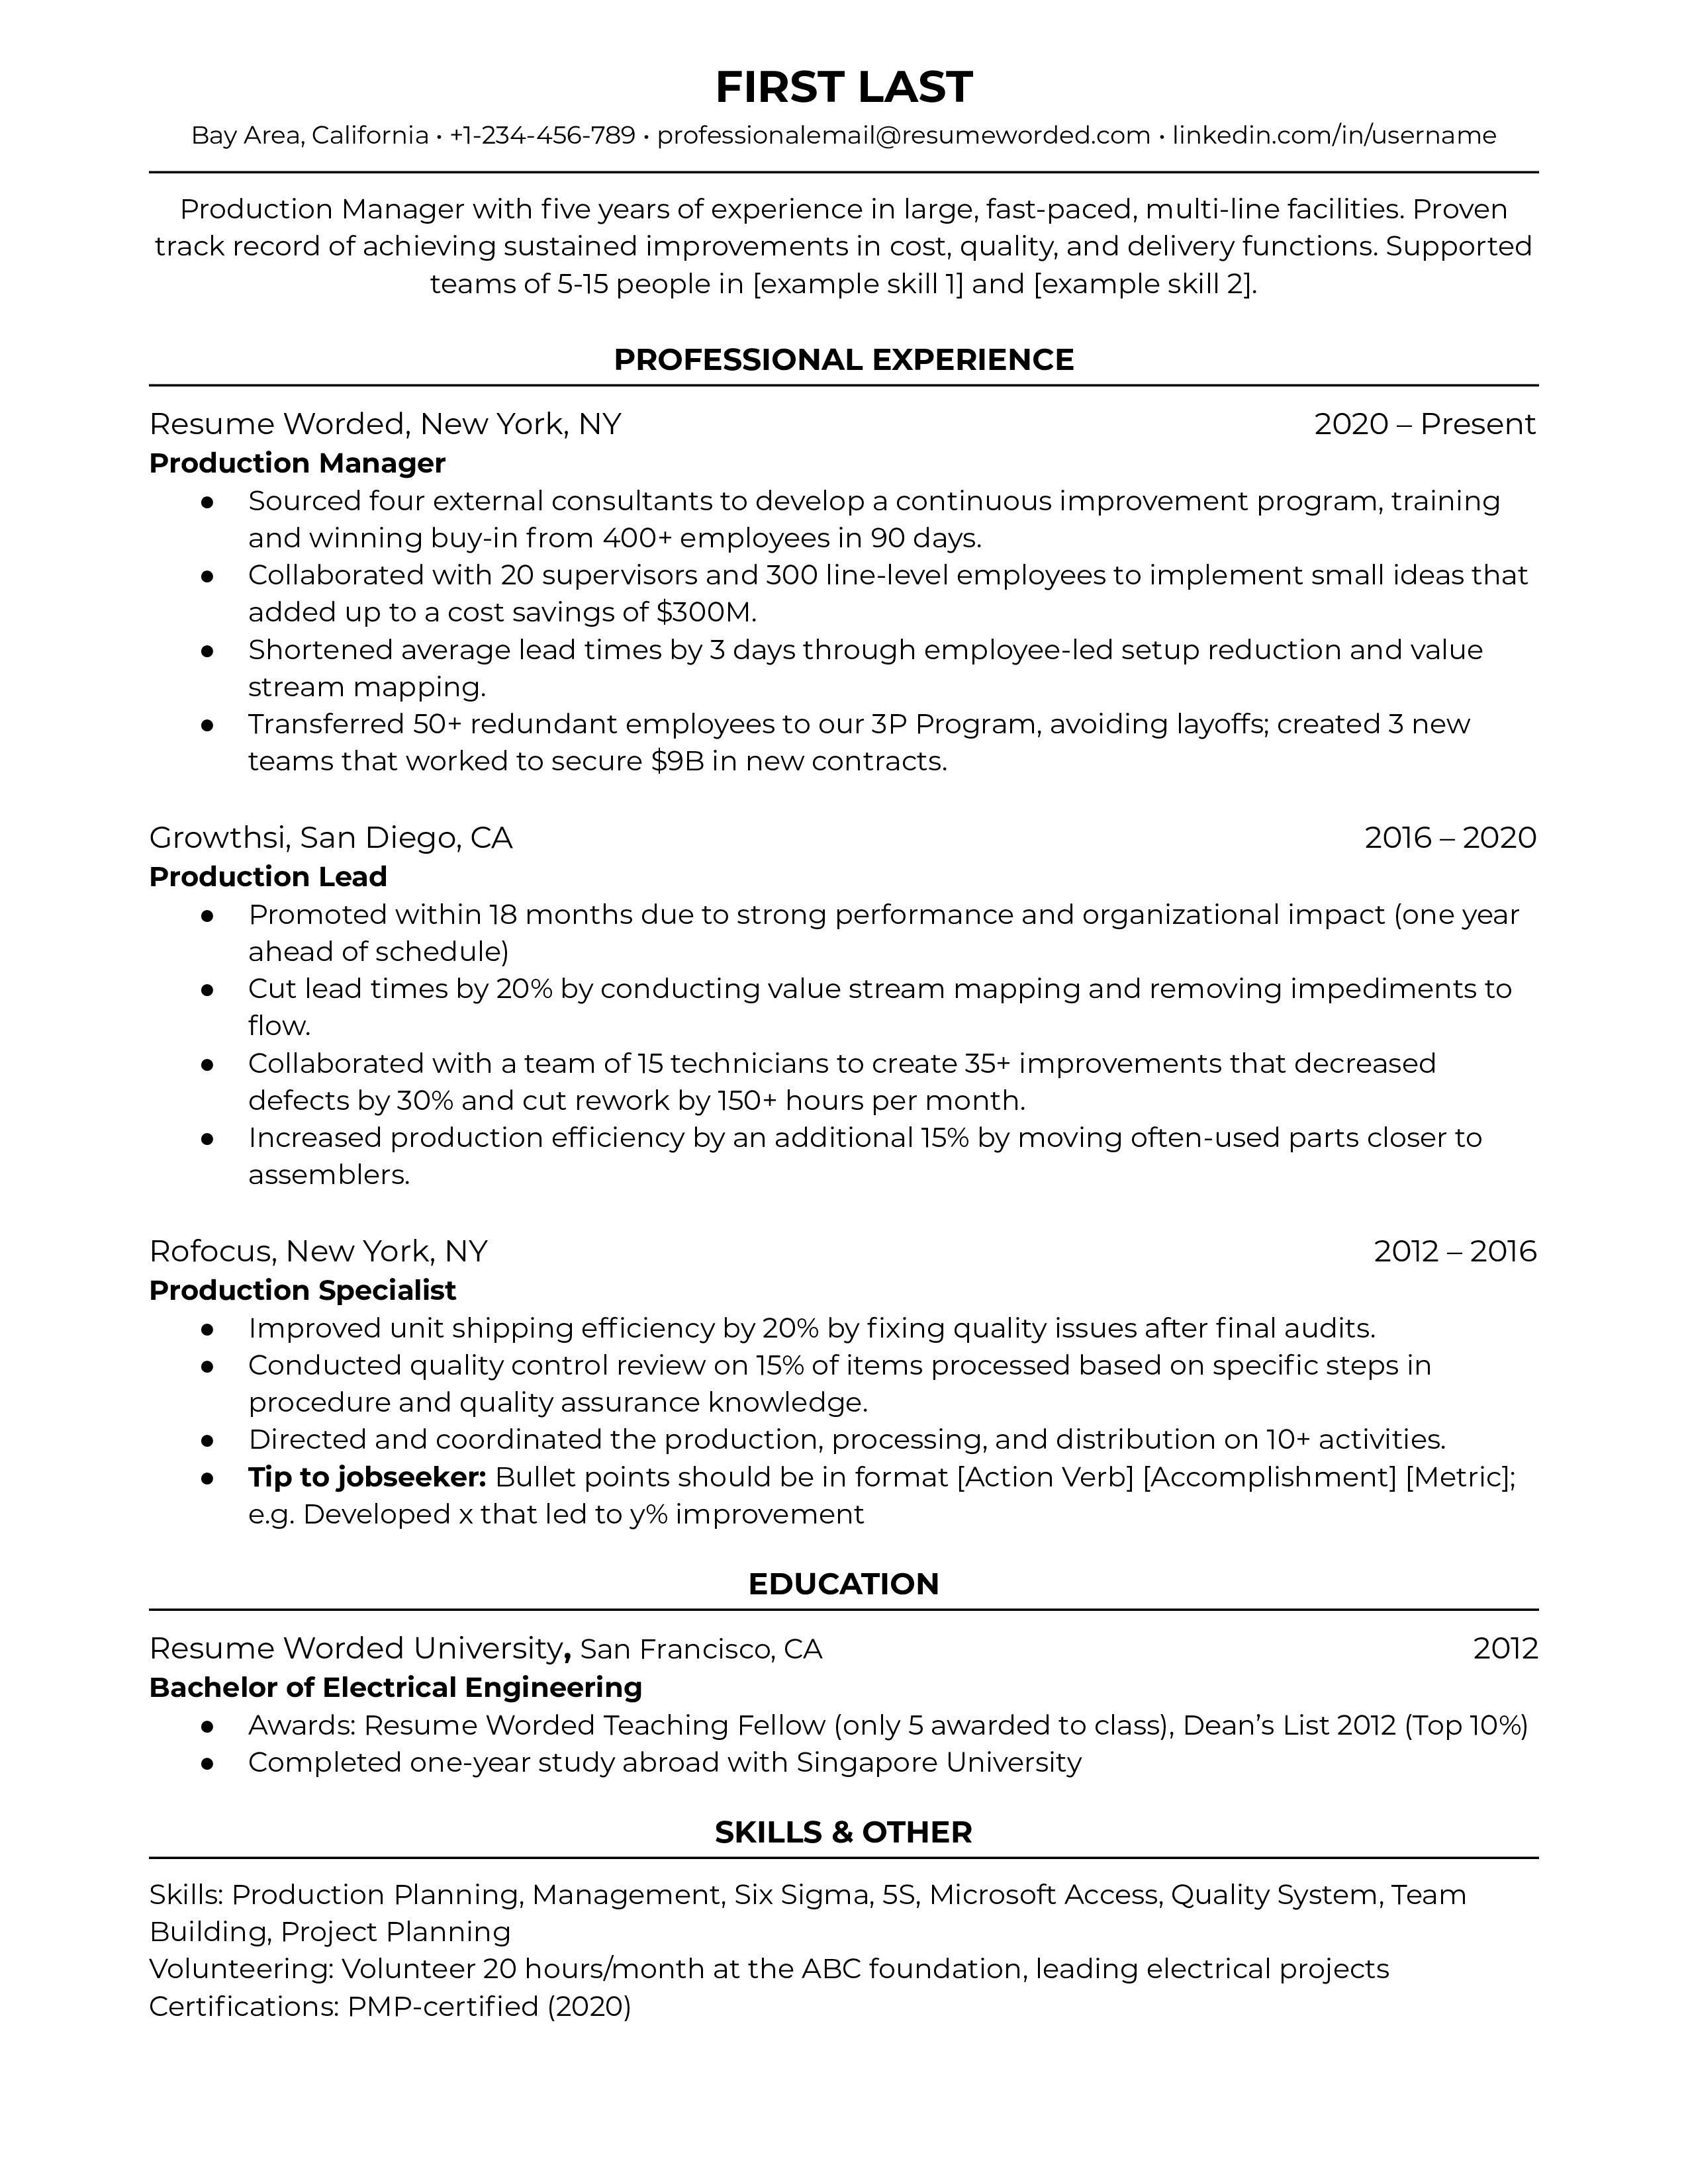 Production Manager resume showcasing experience and achievements